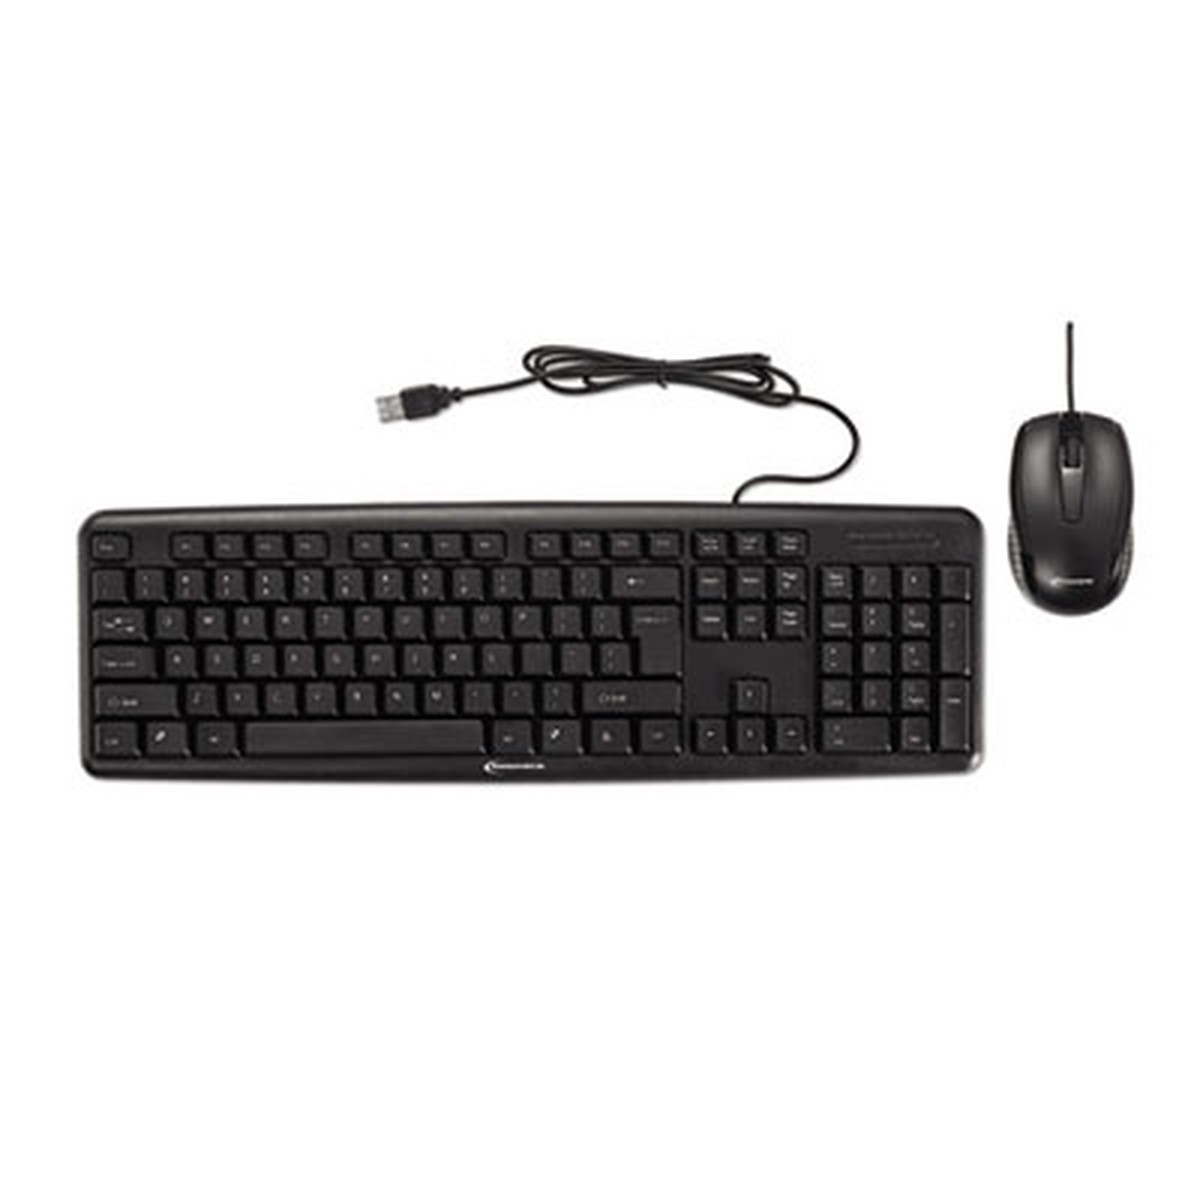 Slimline Keyboard and Mouse, Wired, USB Port, Black